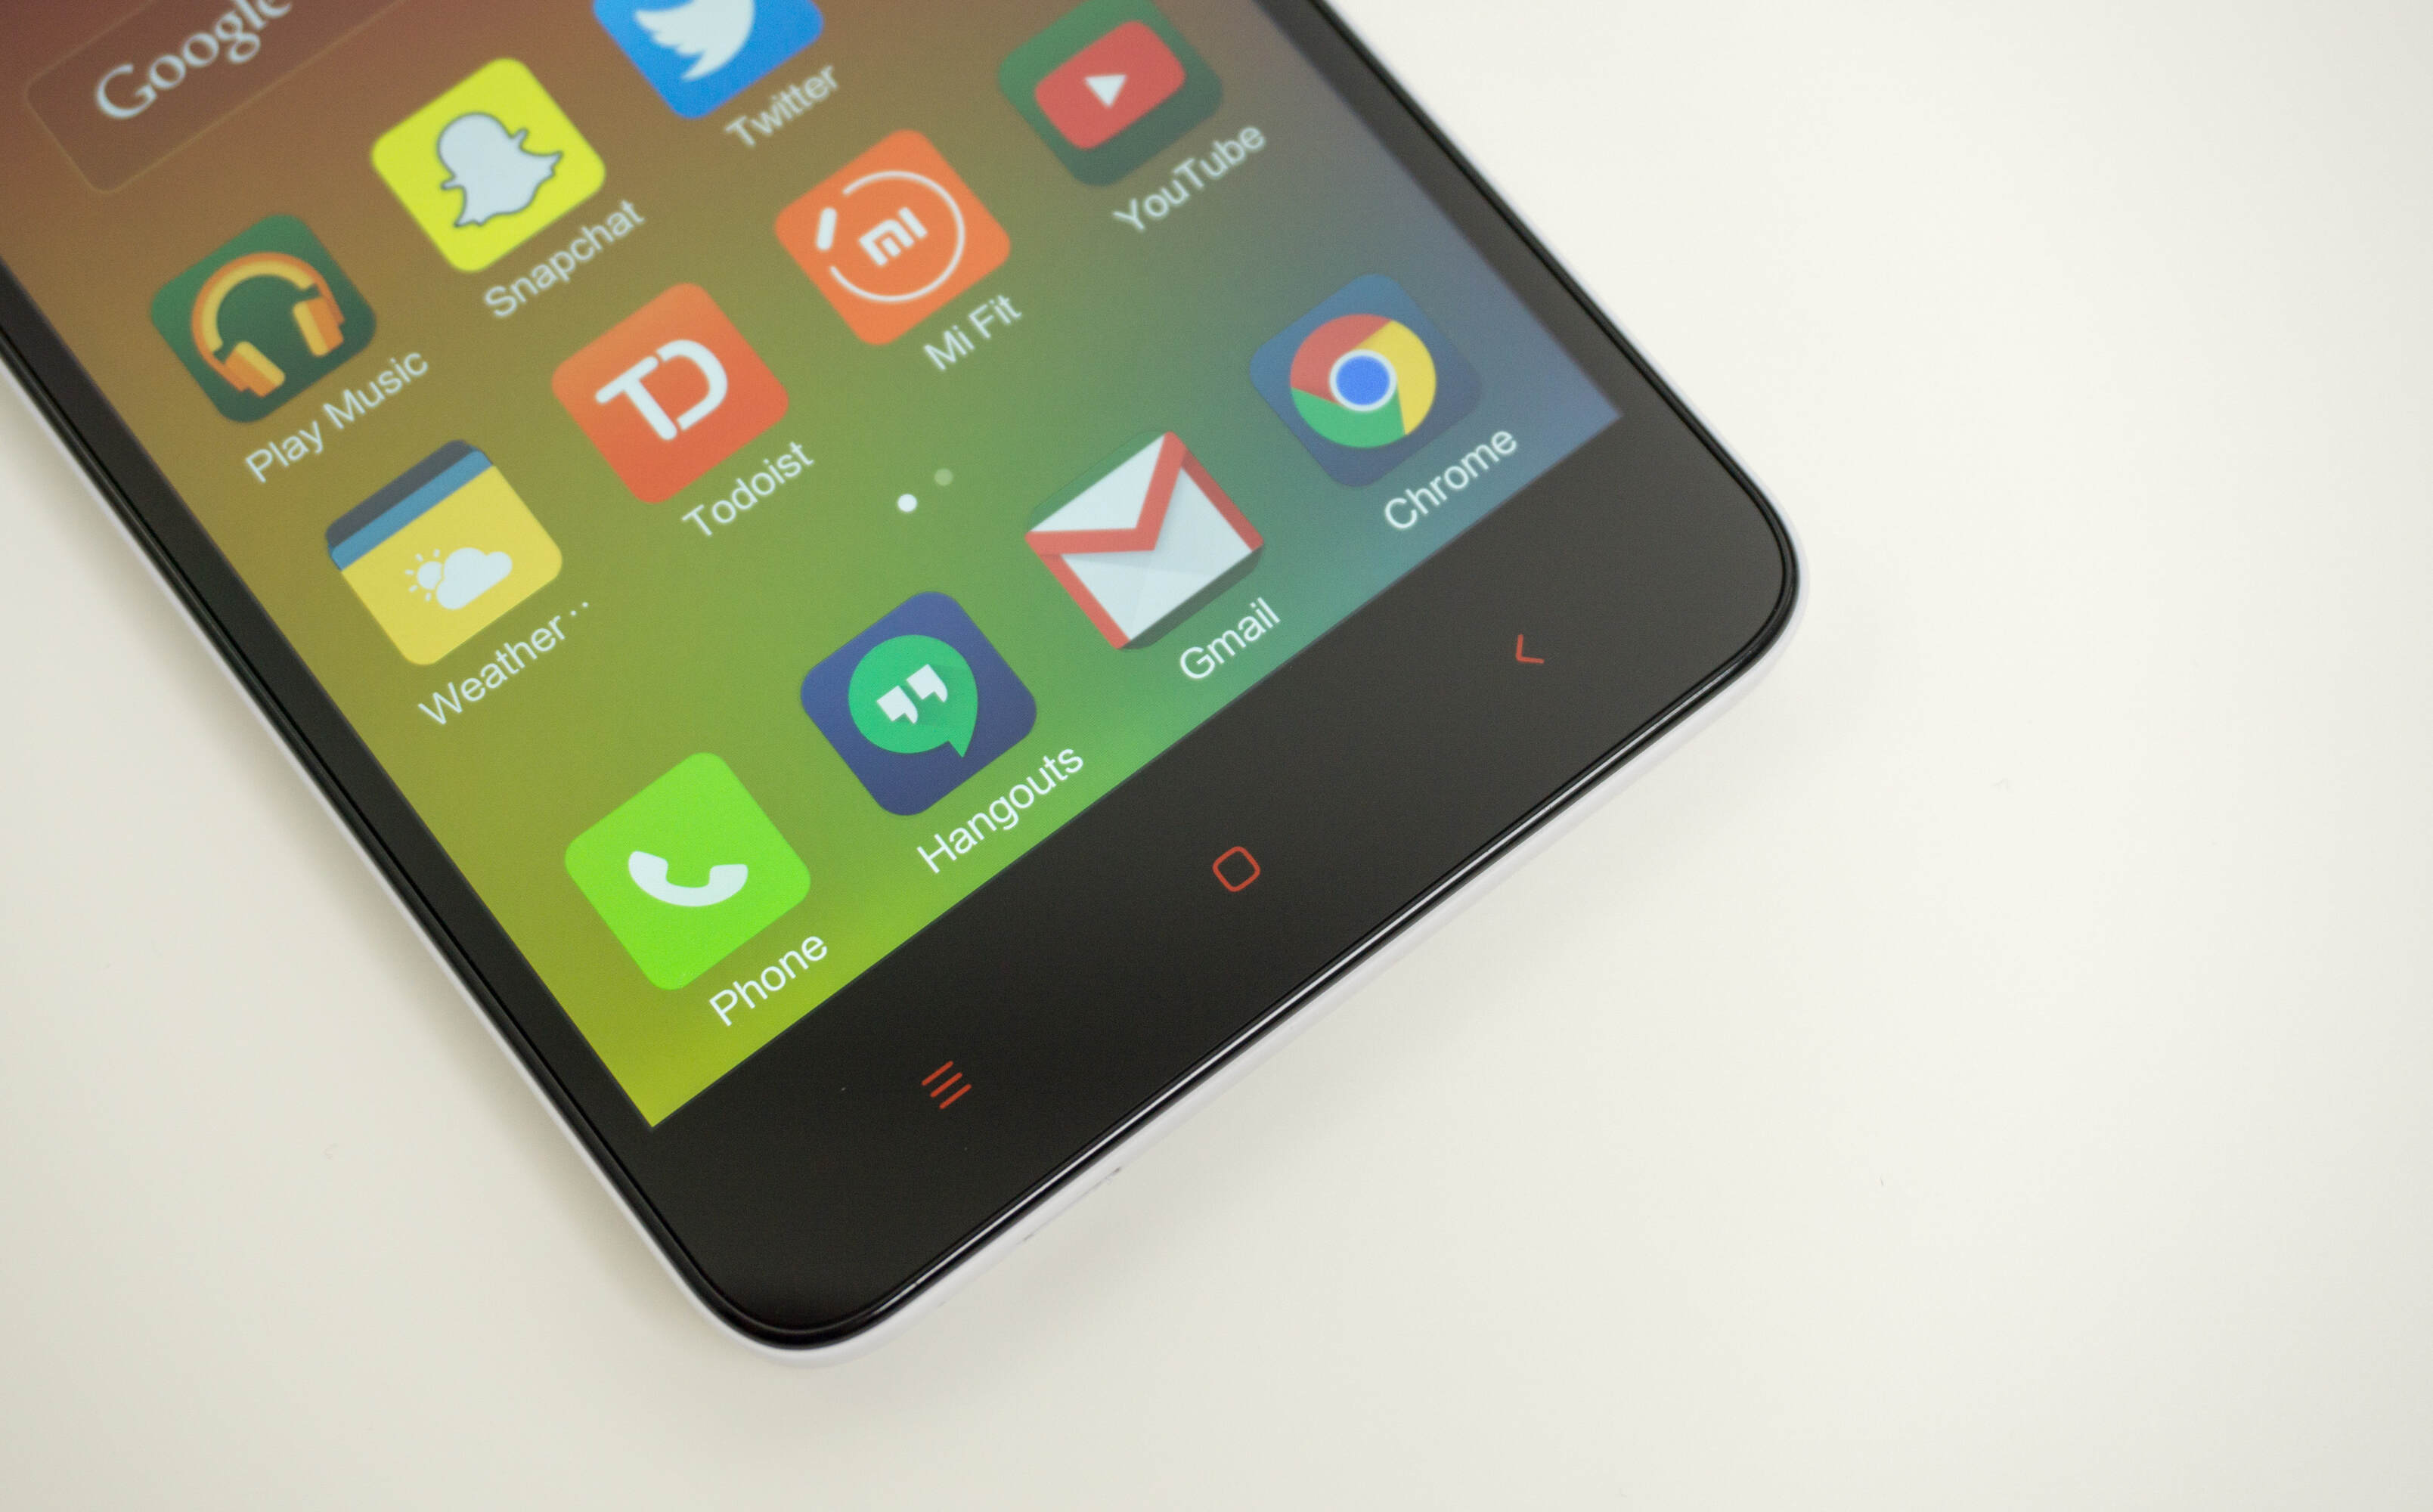 Step-by-Step Guide: Flashing ROM On Xiaomi Redmi 2